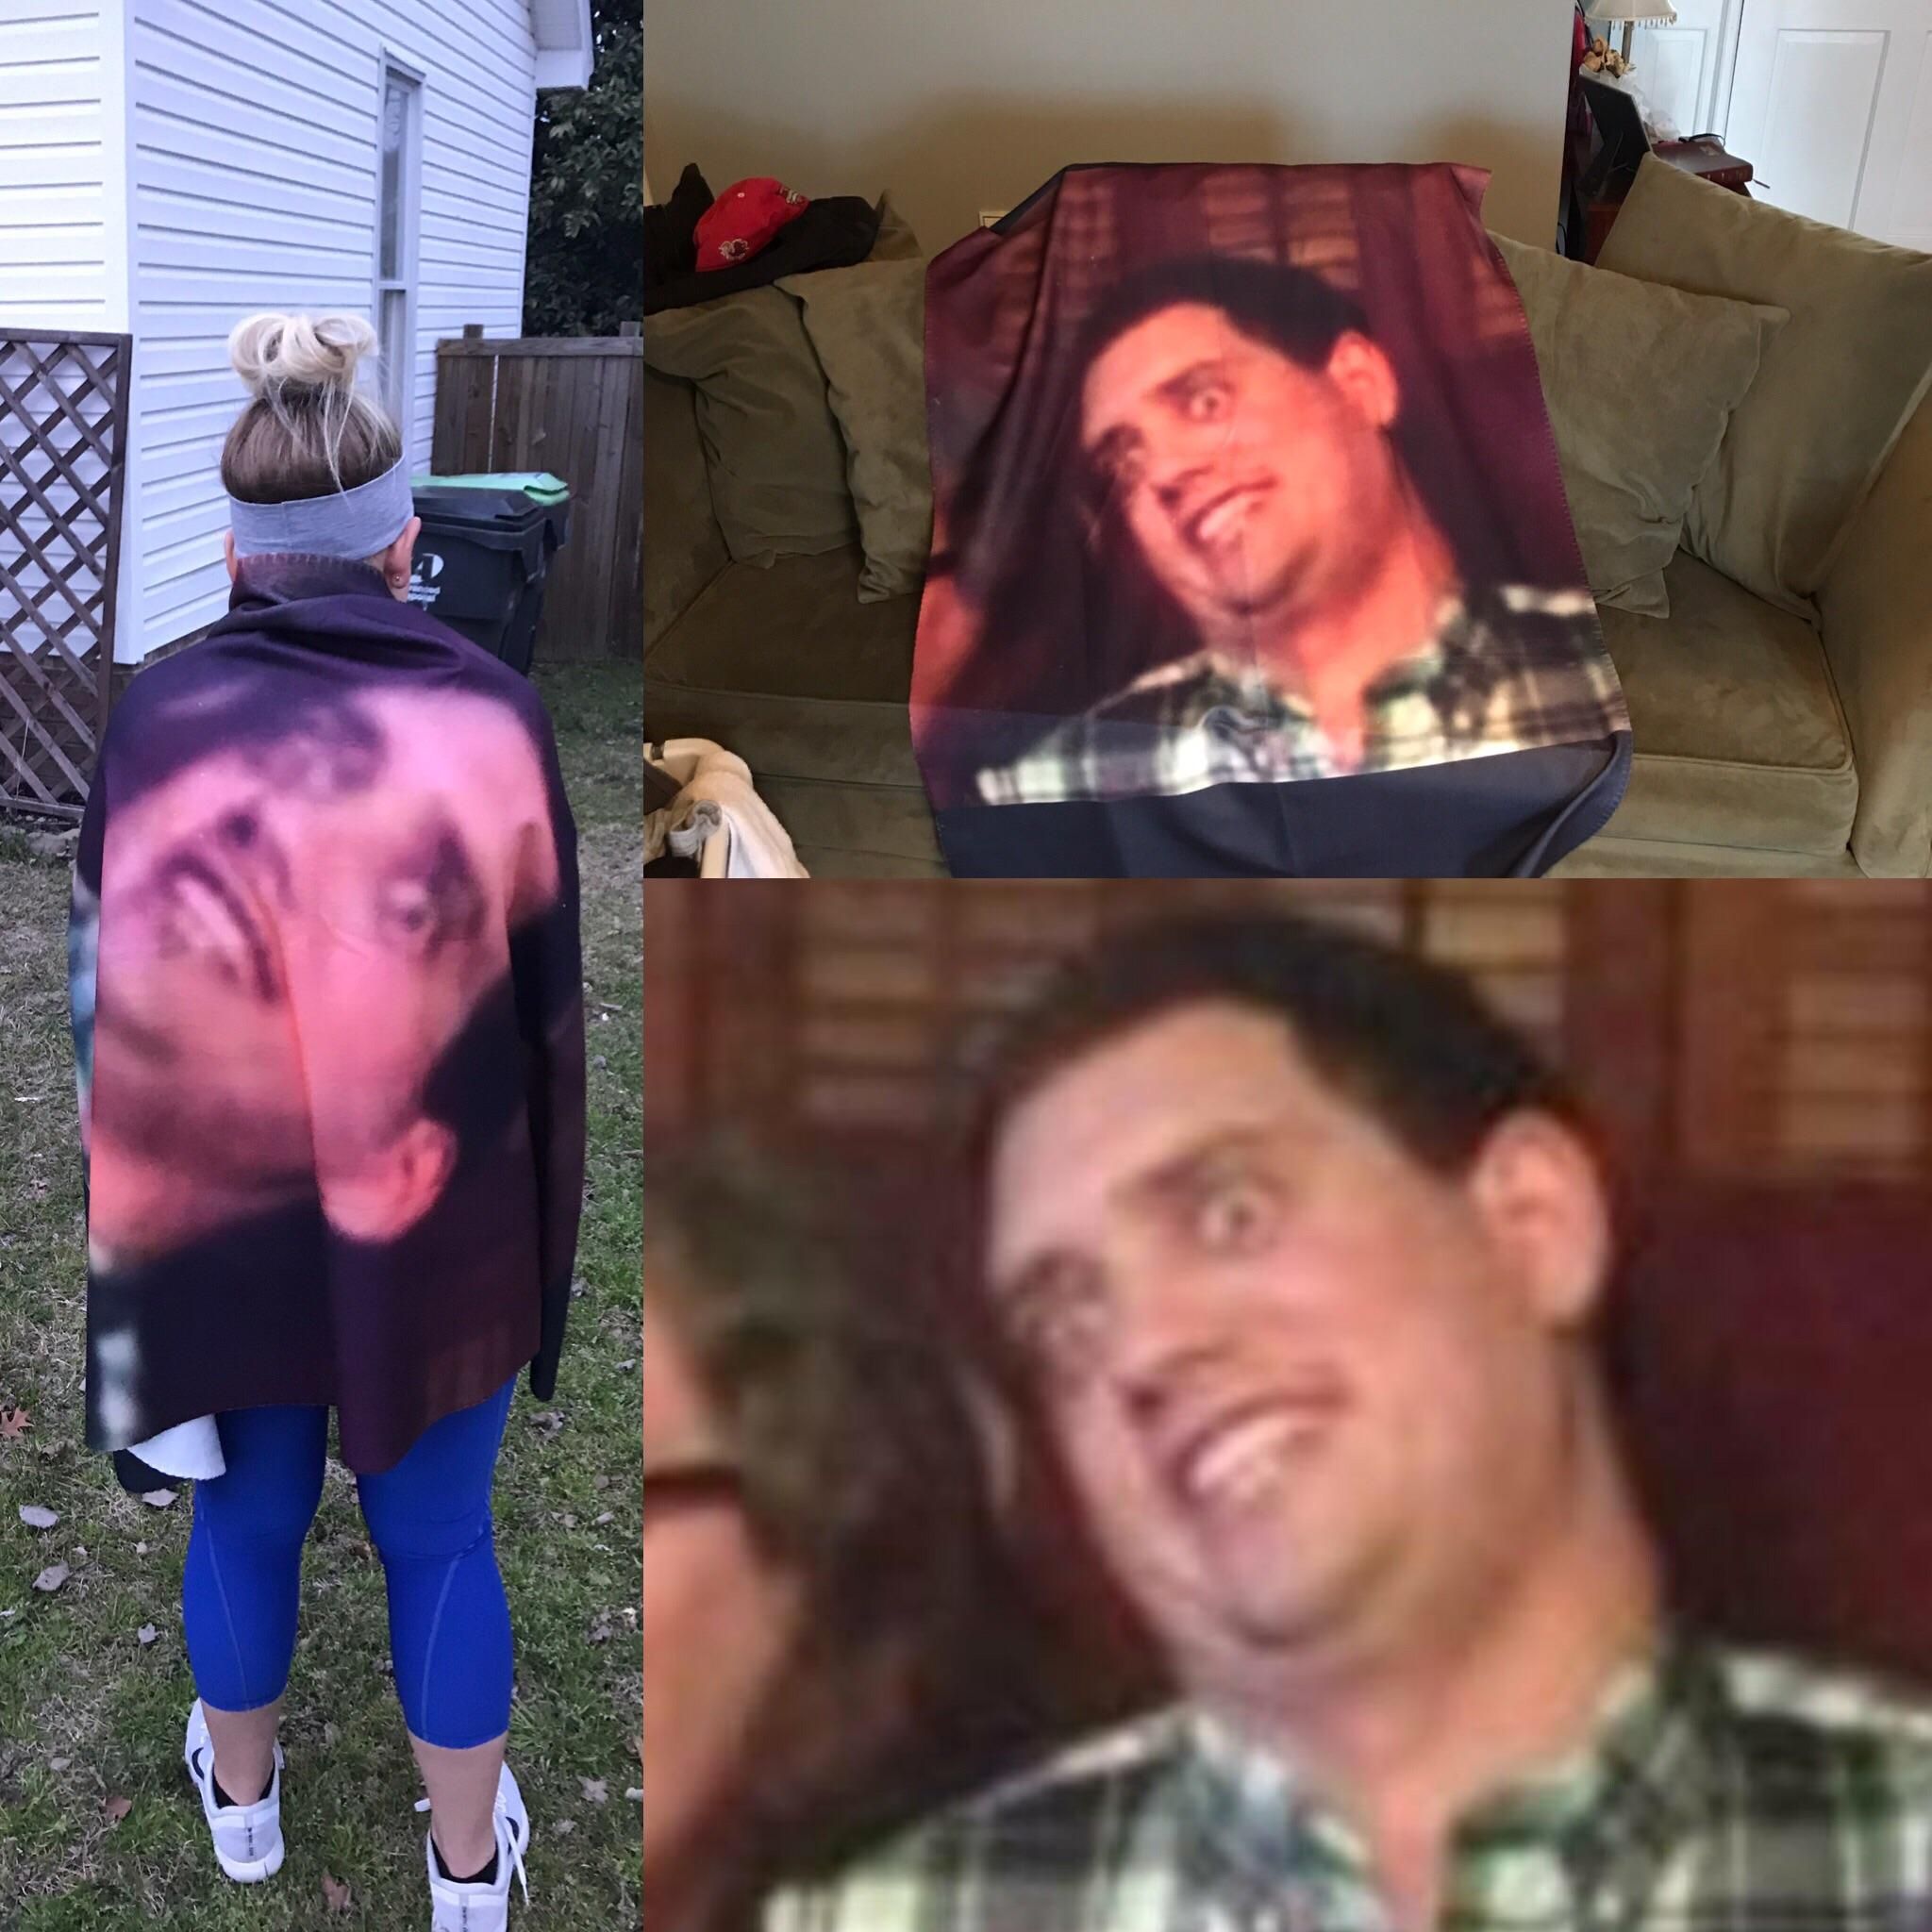 My wife hates this picture of me, so naturally I made it into a blanket for her as a Valentine’s gift.